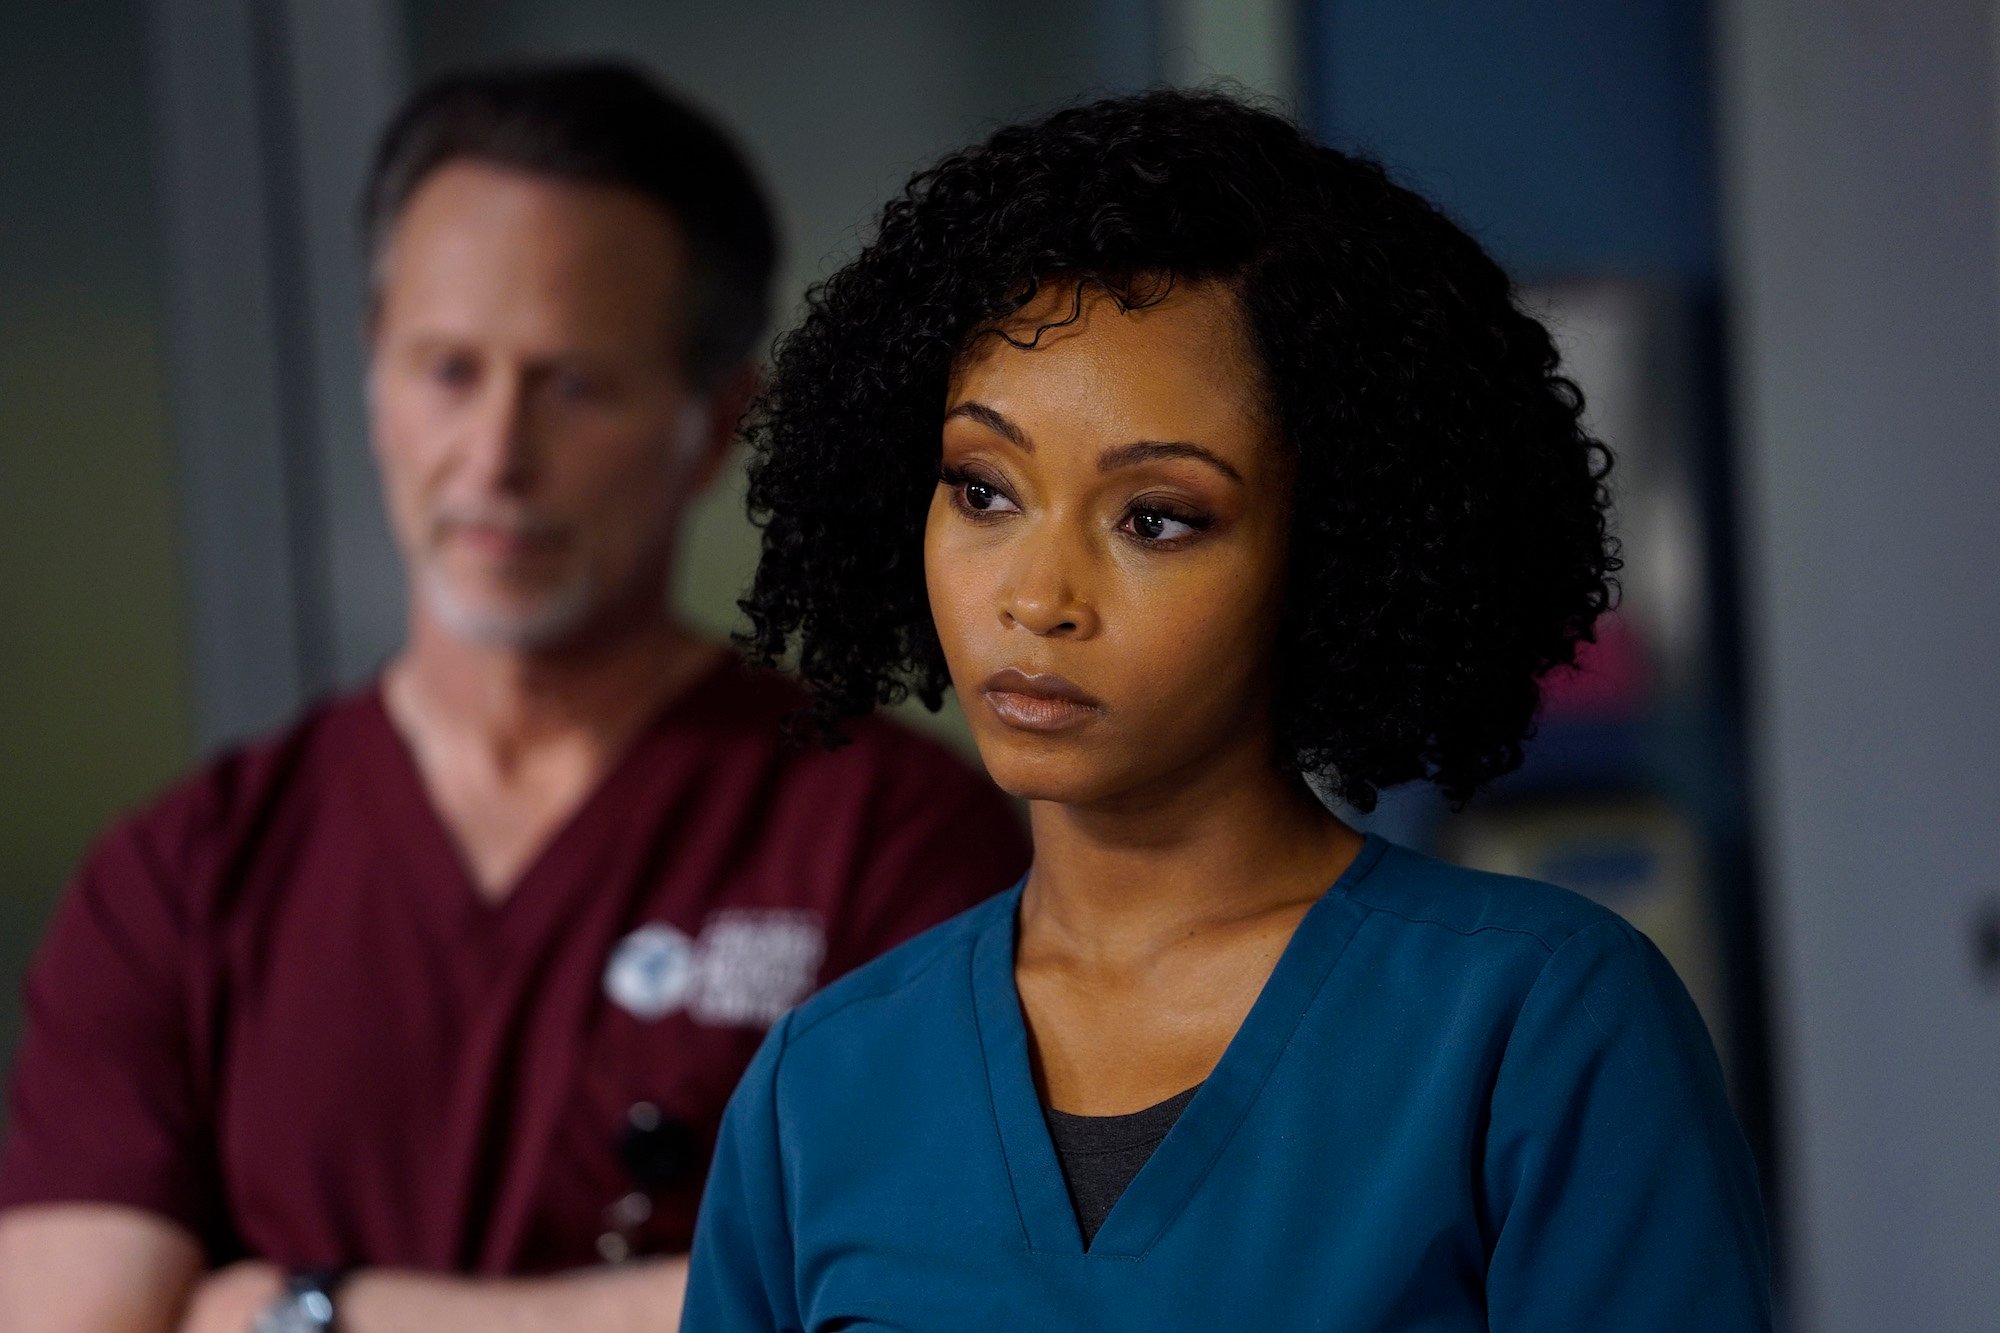 ‘Chicago Med’ Cast: Why Did Yaya DaCosta Leave the Show?